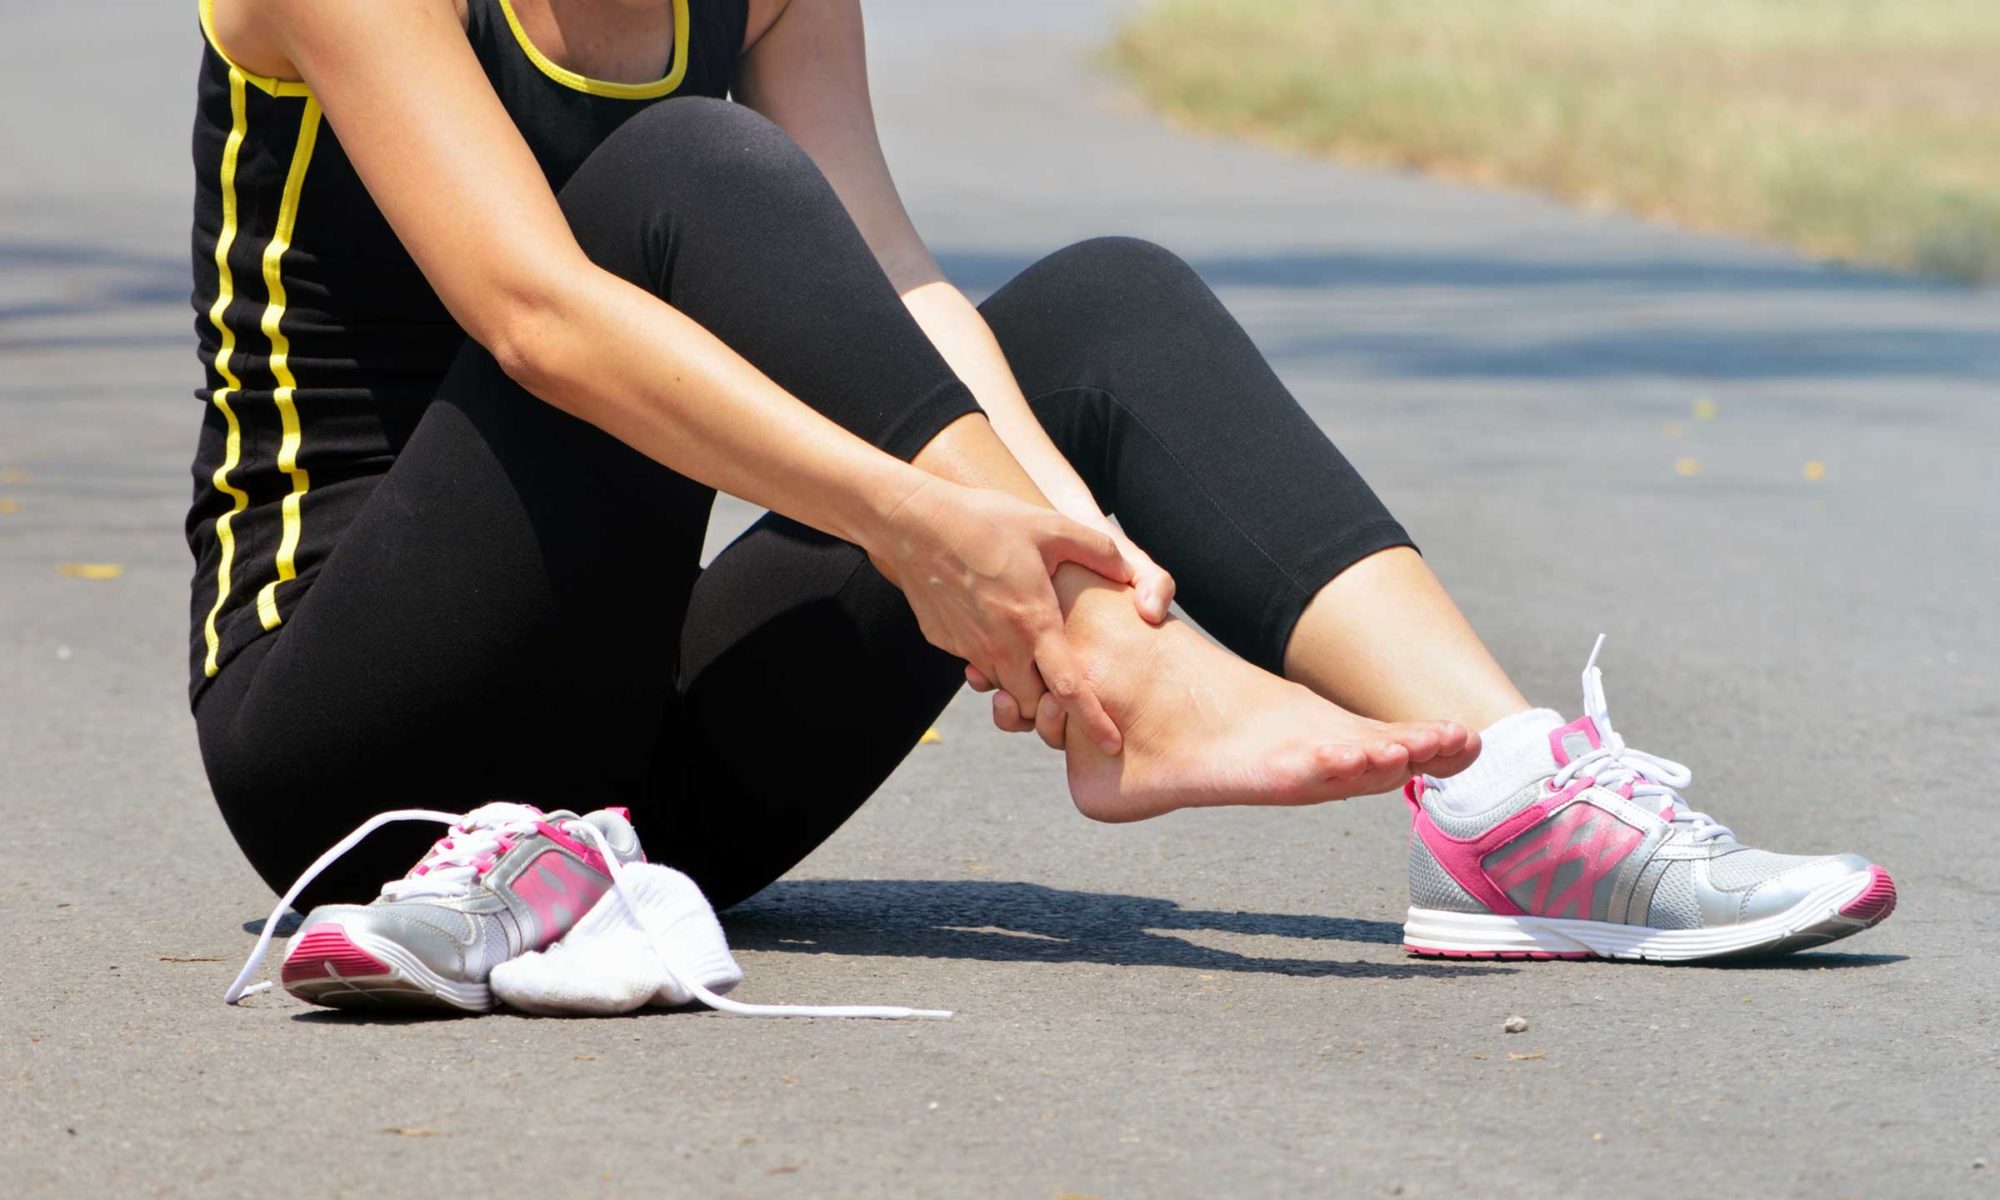 Lady ankle sprain during running